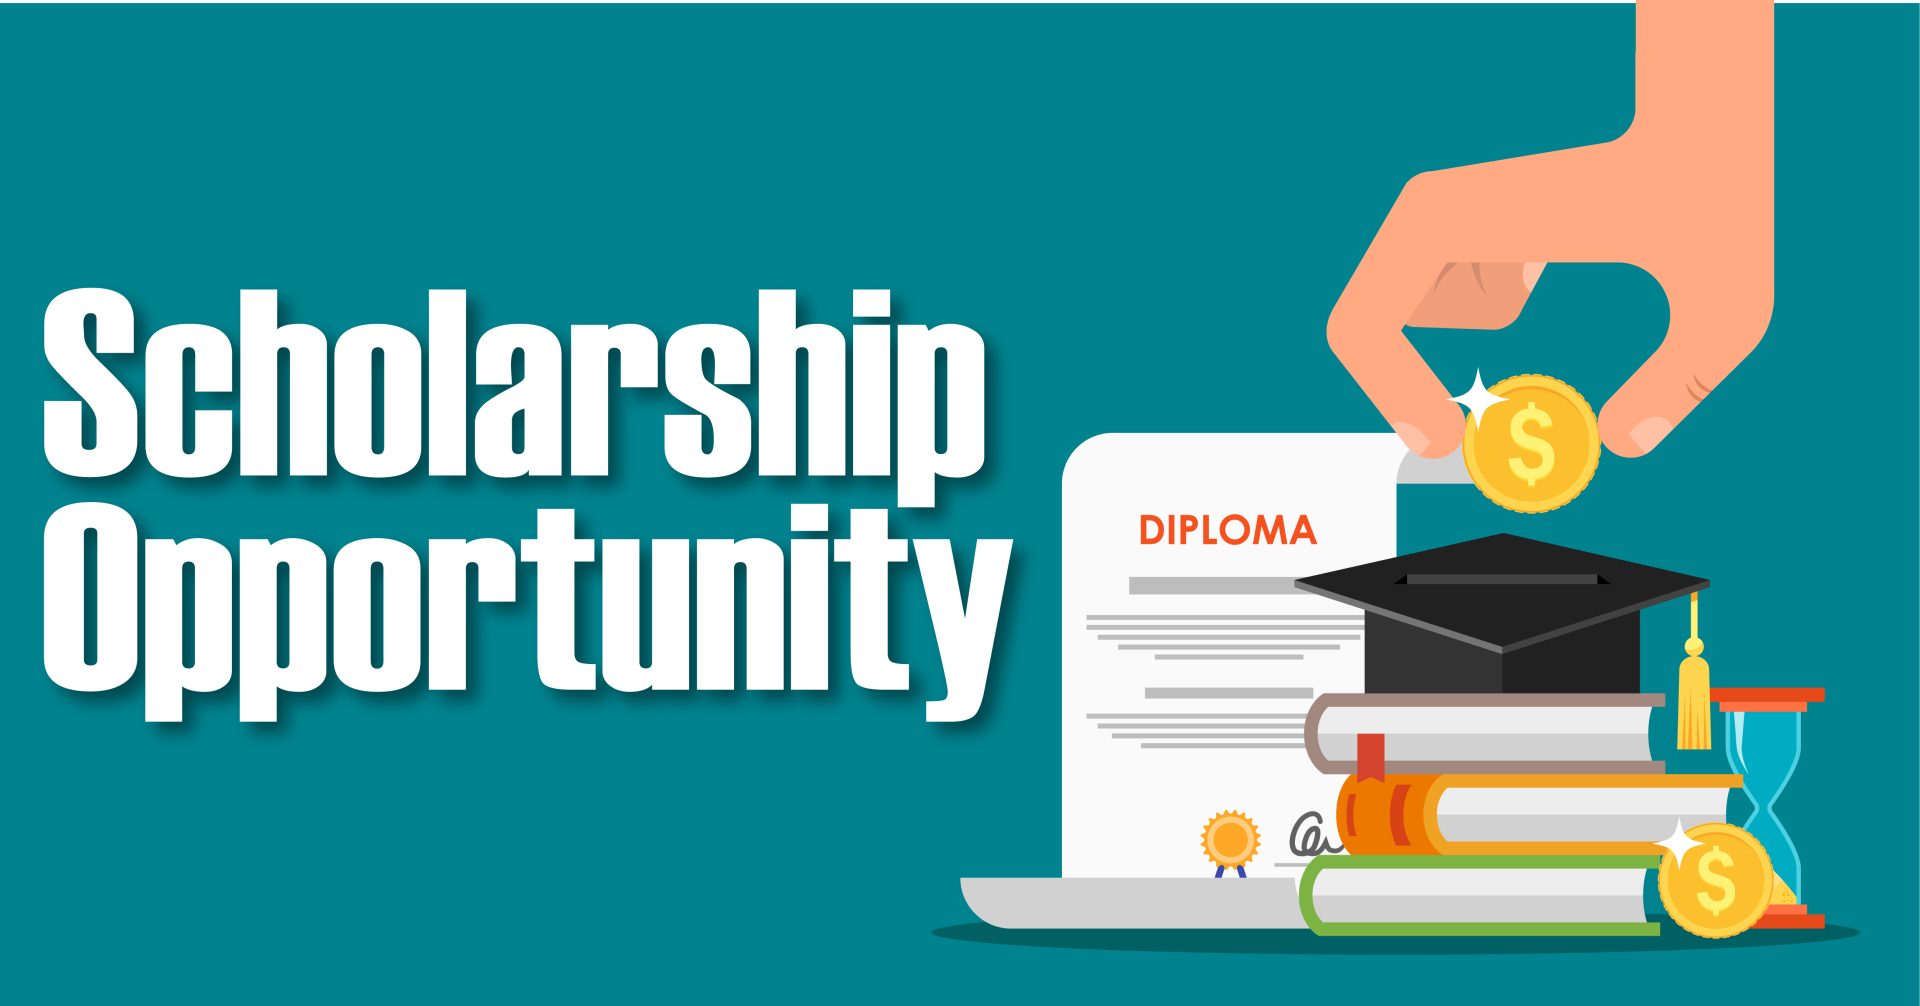 GOVERNMENT OF SVG TUITION SCHOLARSHIP APPLICATIONS NOW OPEN - Asberth